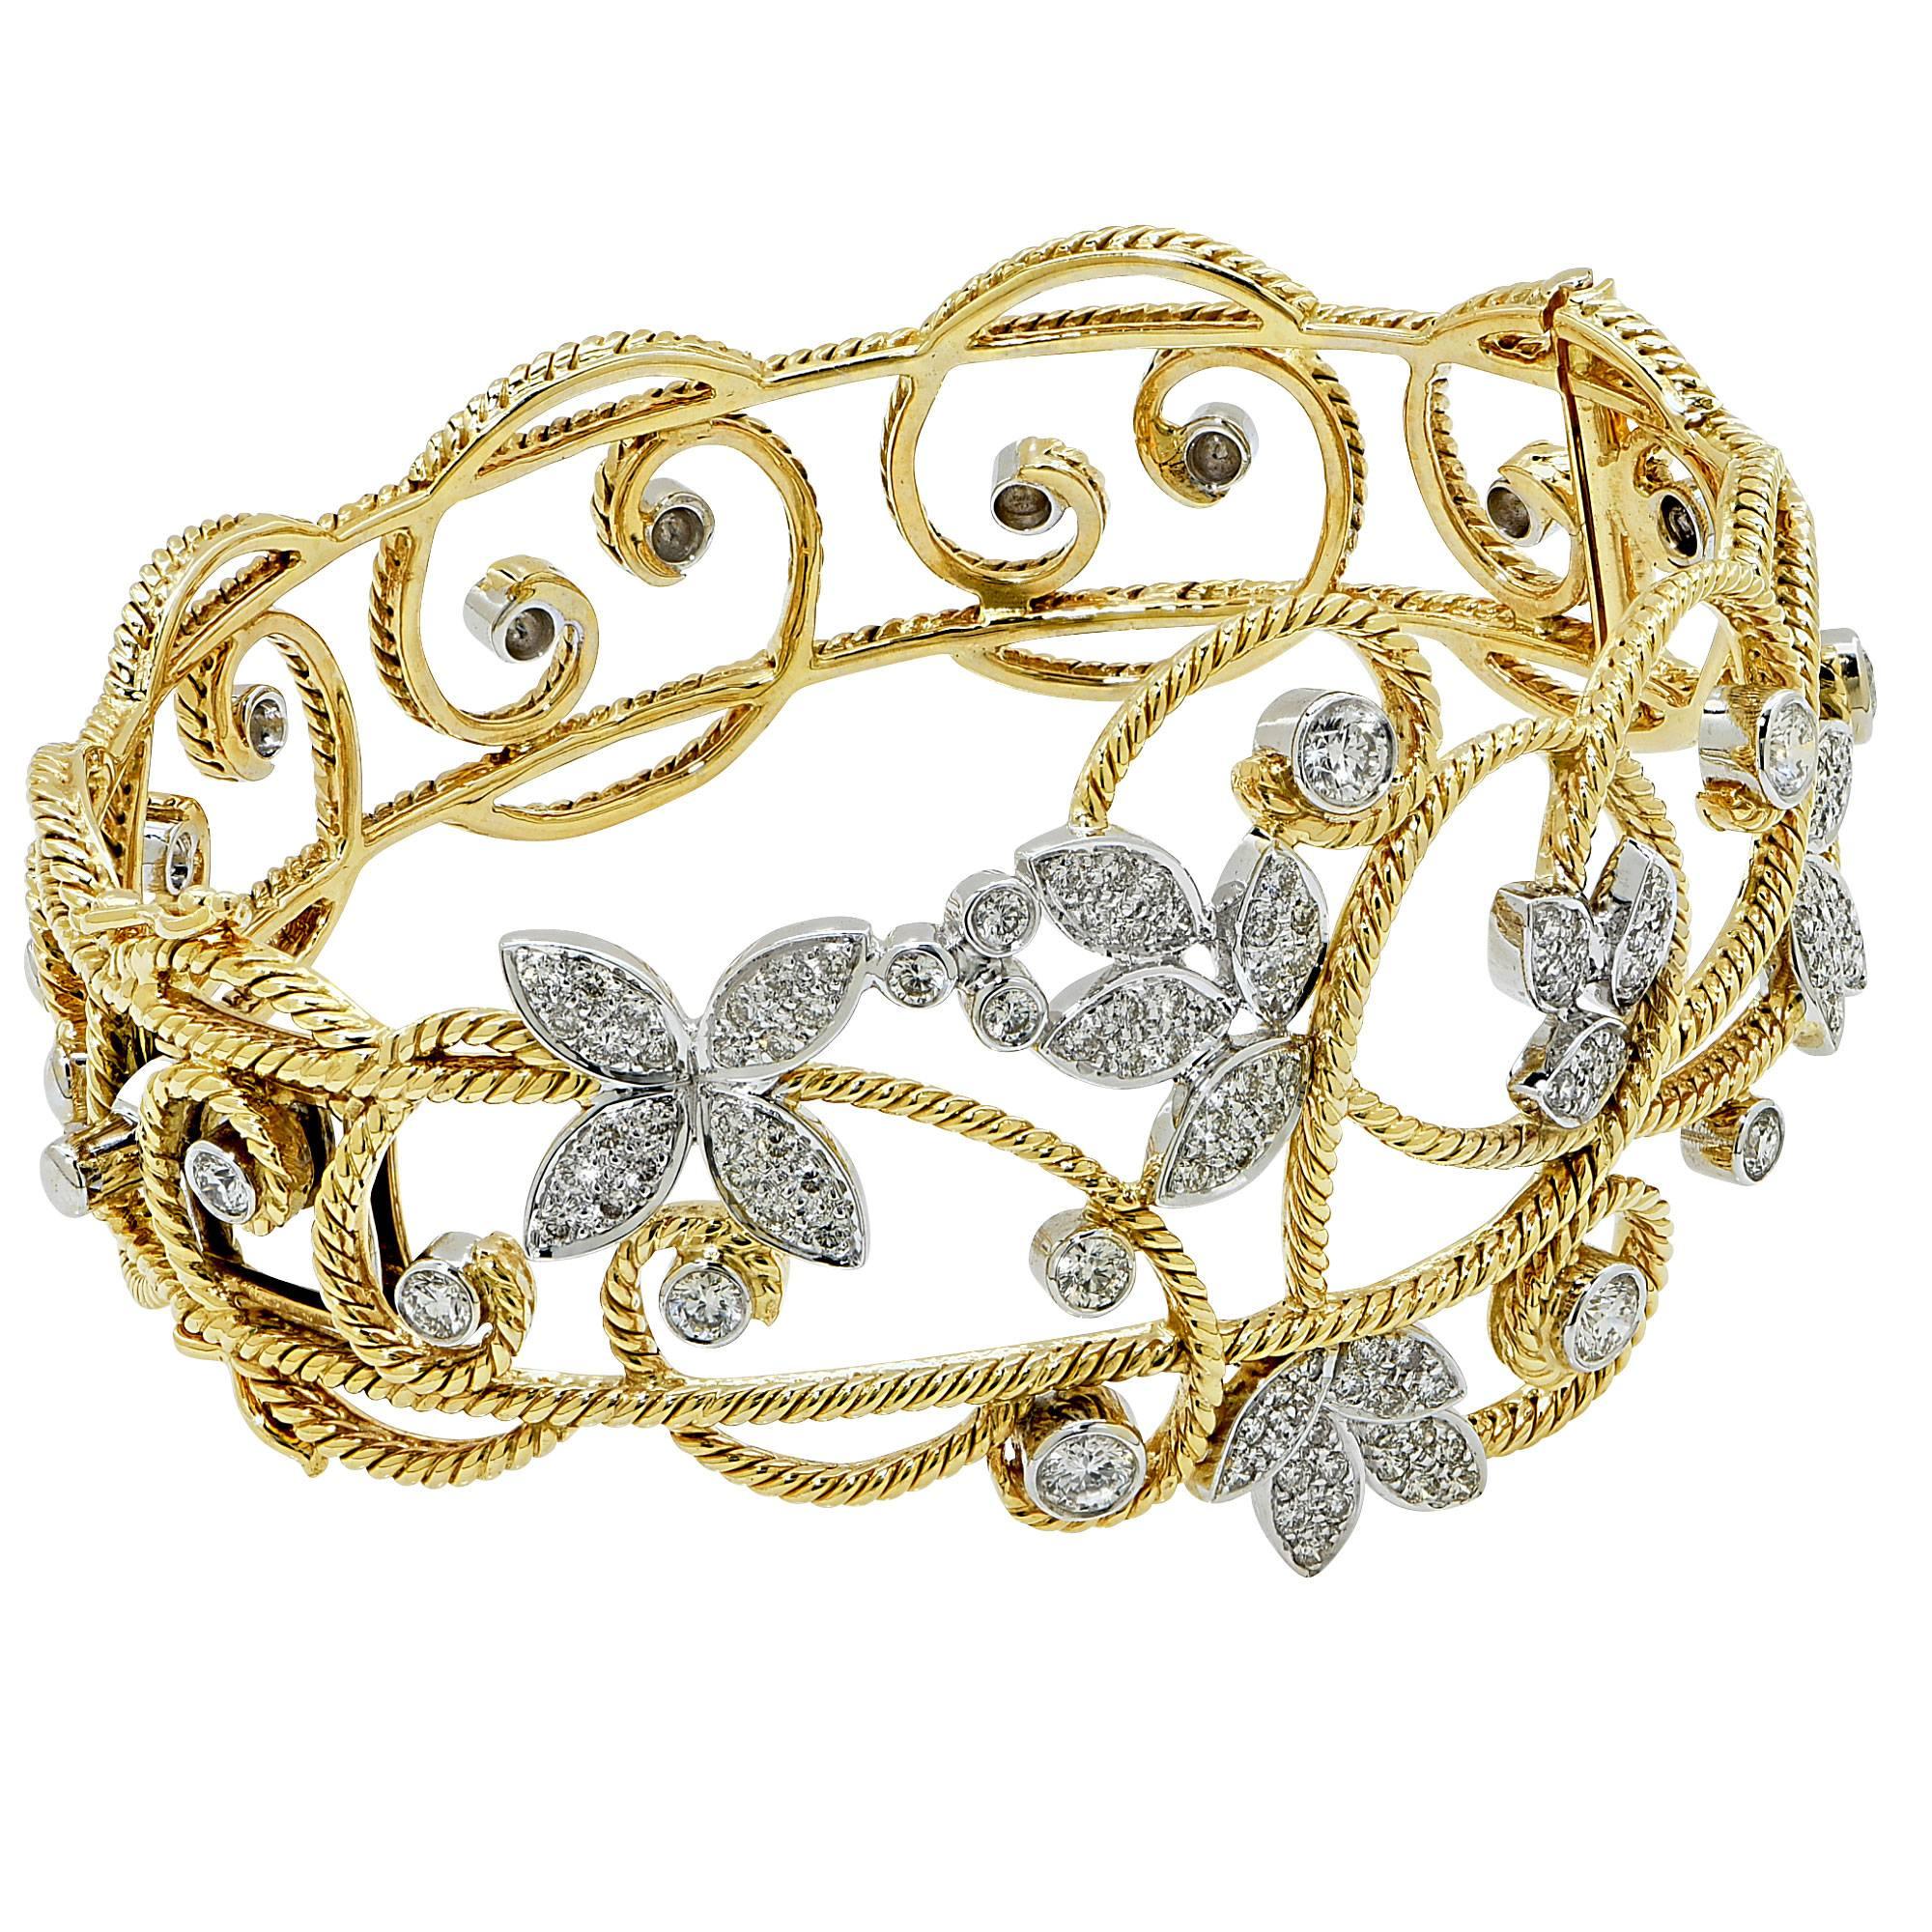 18k white and yellow gold bangle bracelet featuring 122 round brilliant cut diamonds weighing approximately 3cts total G color VS clarity.

The bracelet measures 7 inches in circumference by 2.30 inches in height by 2.60 inches in width by 1.35